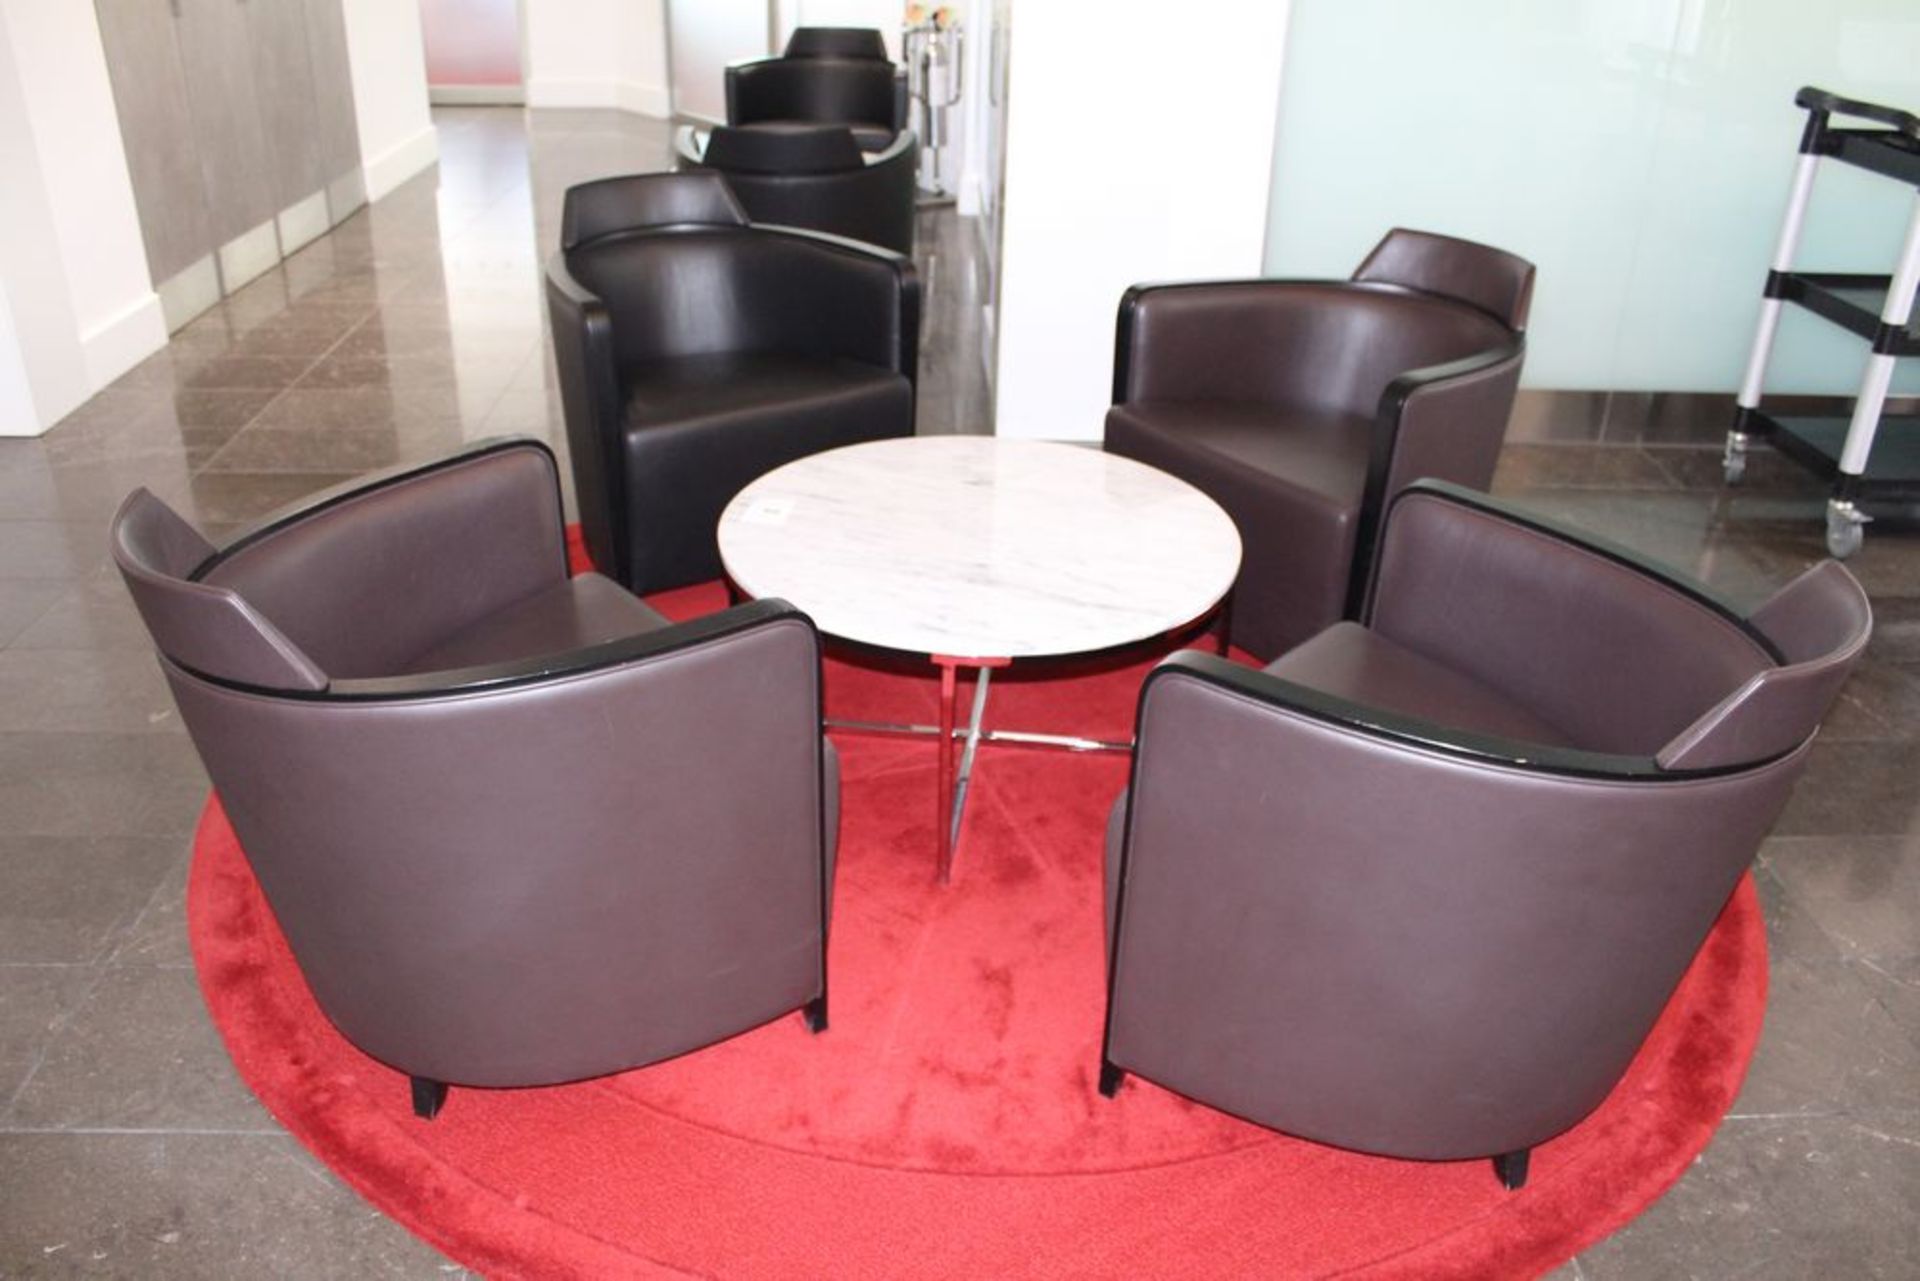 4 Moroso Black Tub Reception Chairs with Marble Topped 800mm Diameter Coffee Table